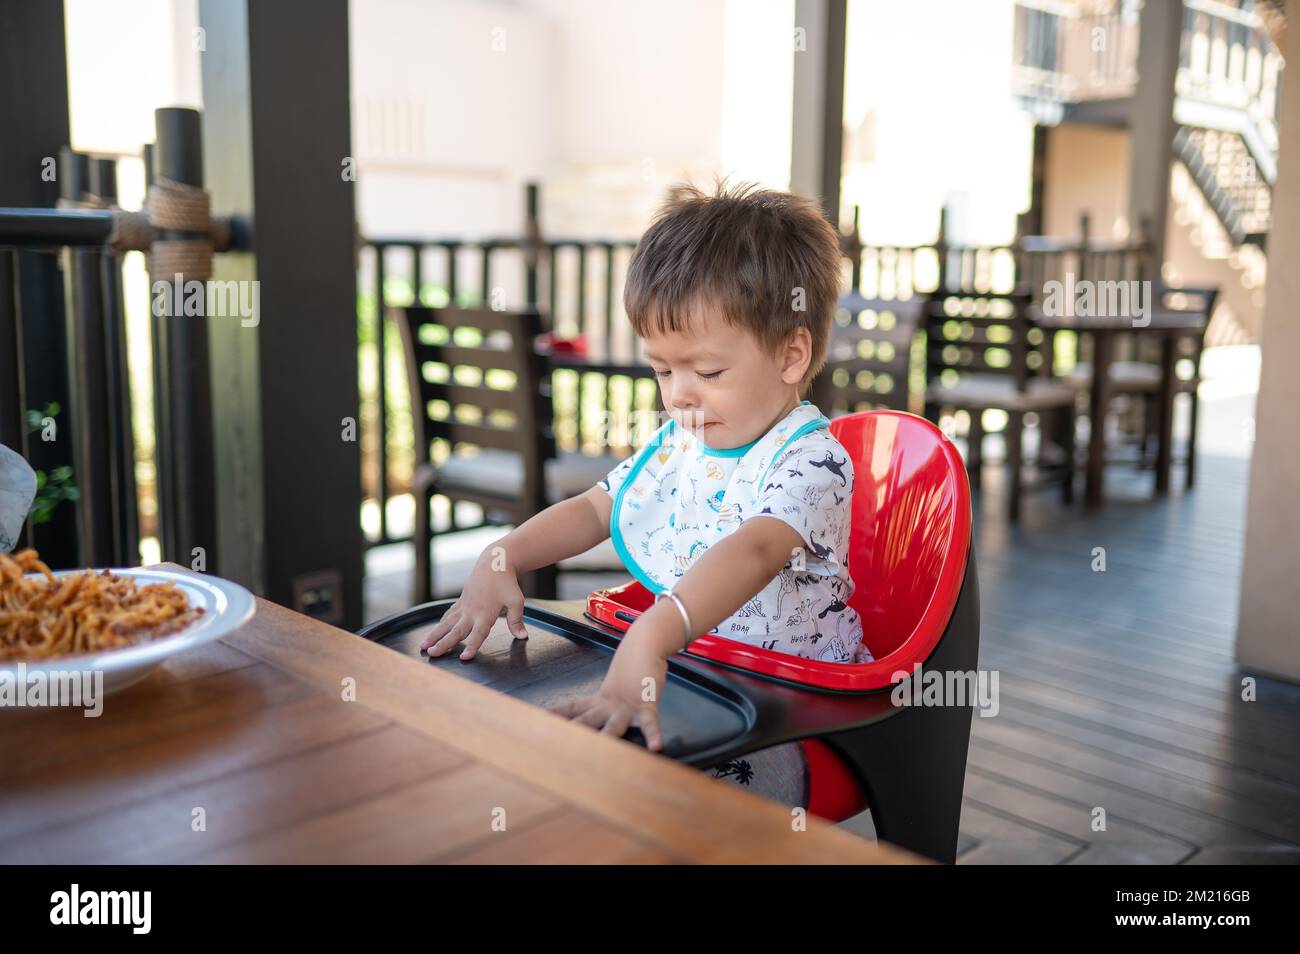 Toddler sitting on a high chair in the restaurant during a meal. Handsome multiracial one and half year old baby boy having a meal outdoors Stock Photo